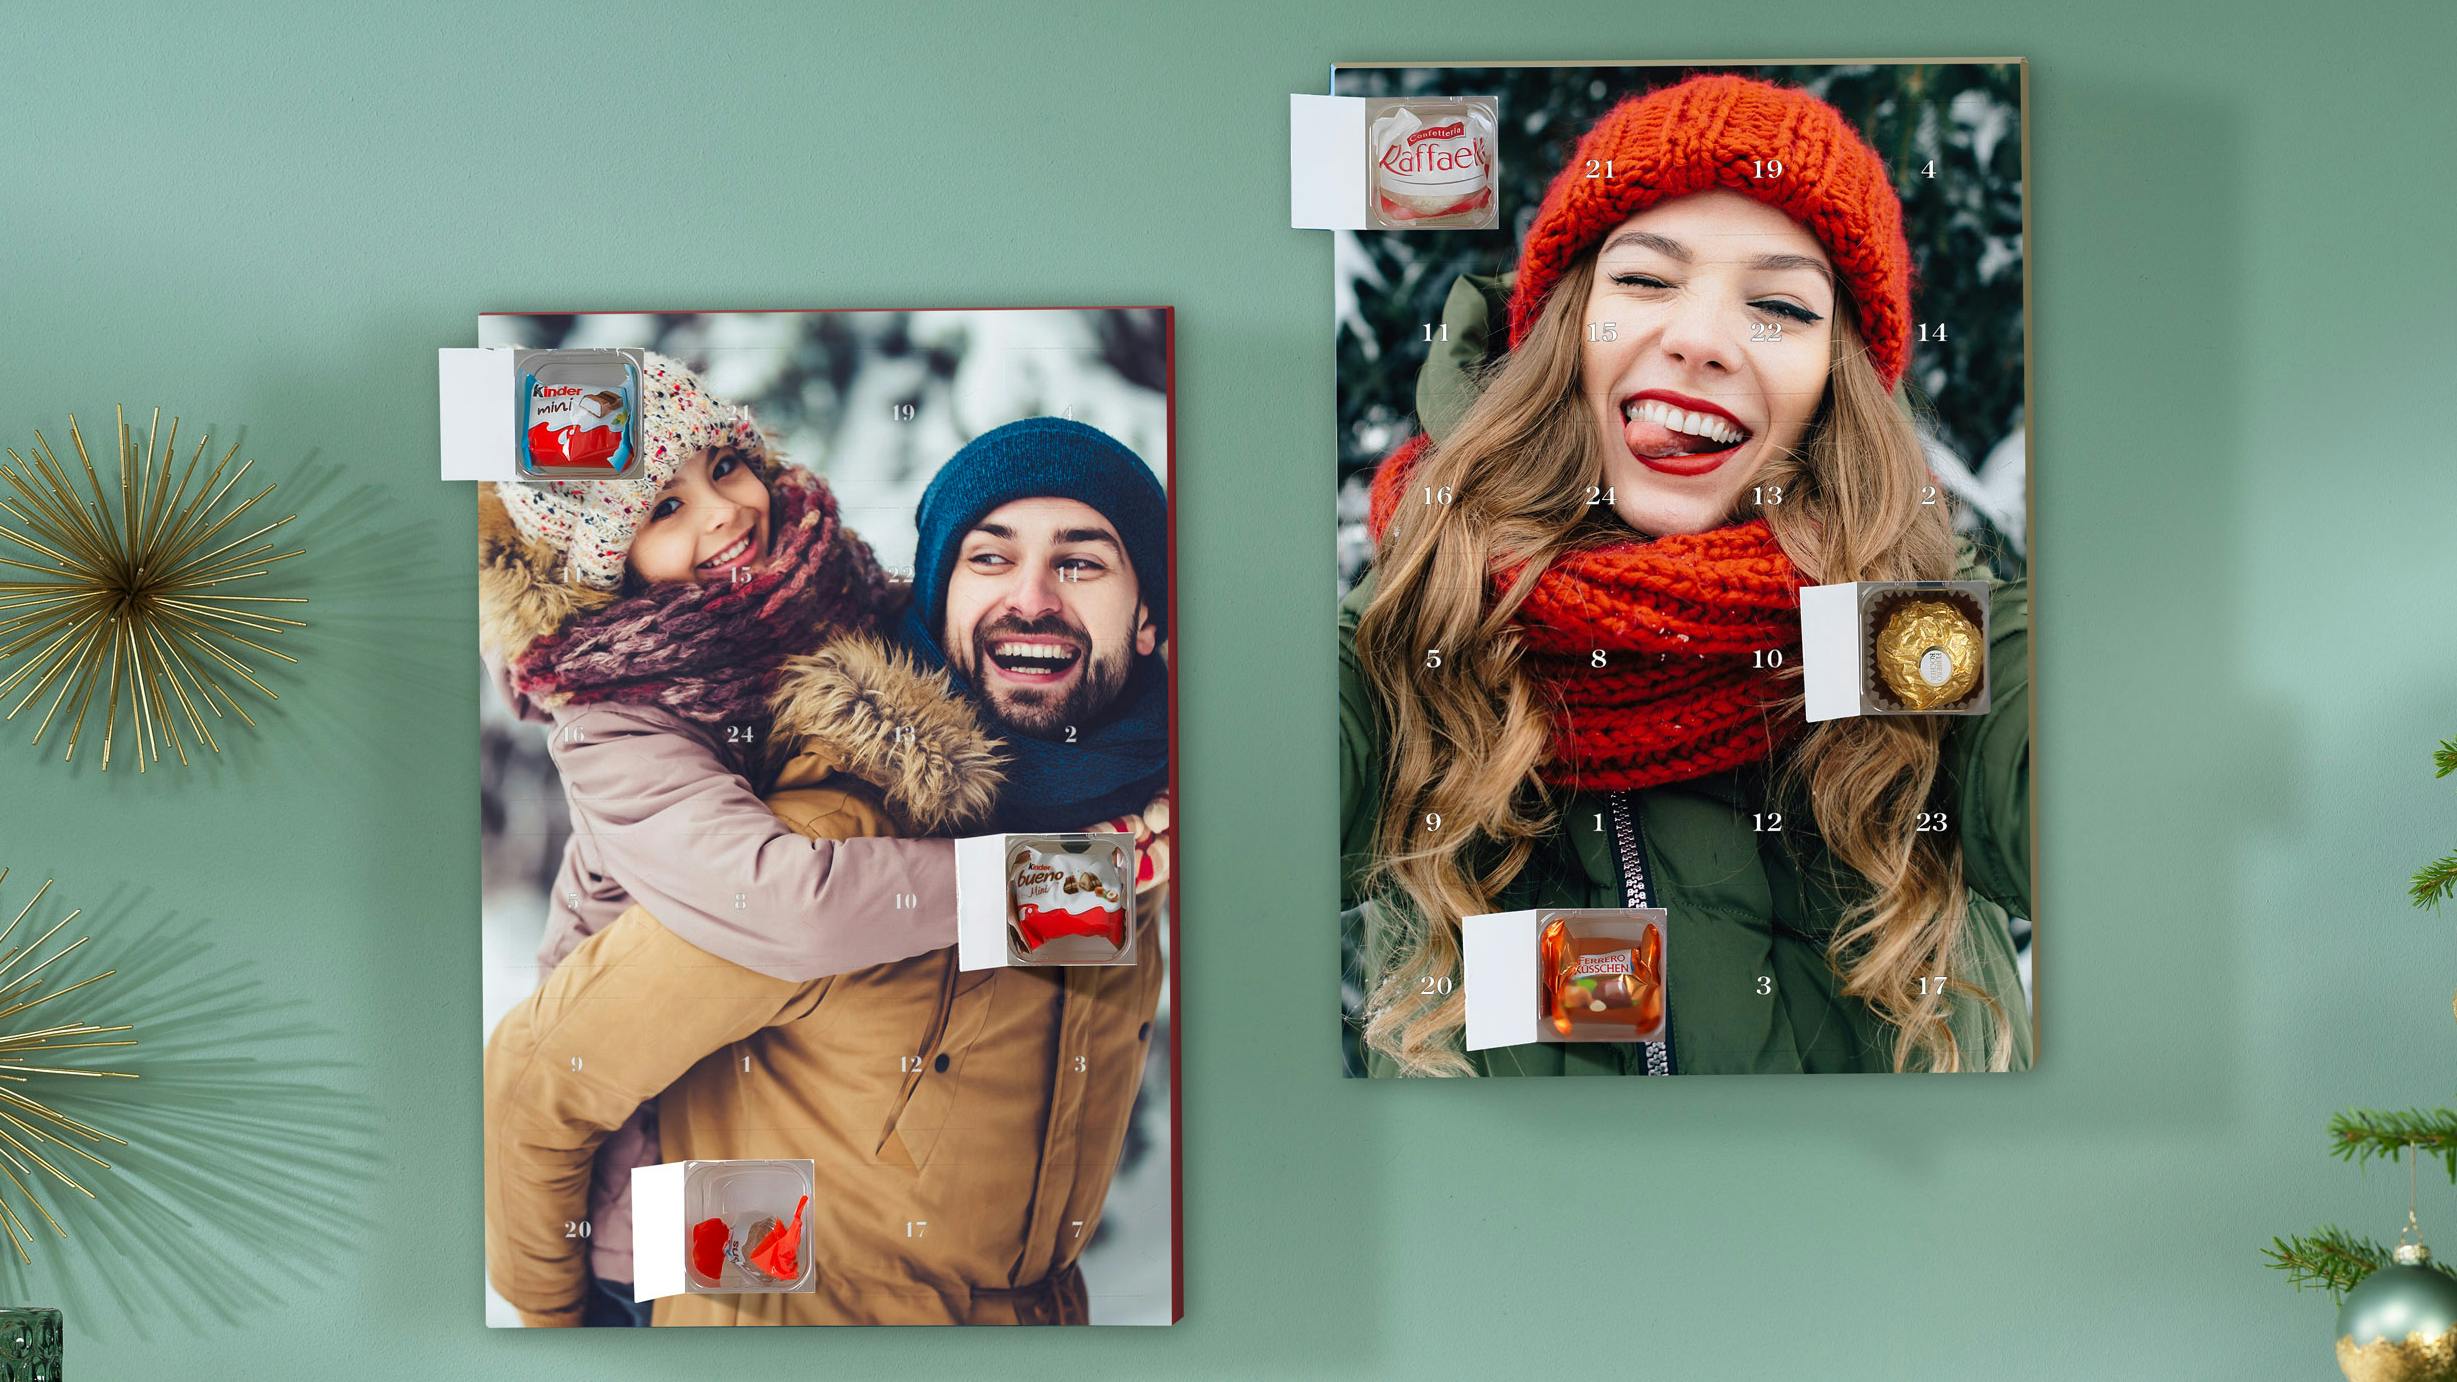 Photo Advent Calendar with kinder or Ferrero chocolates with wintery images